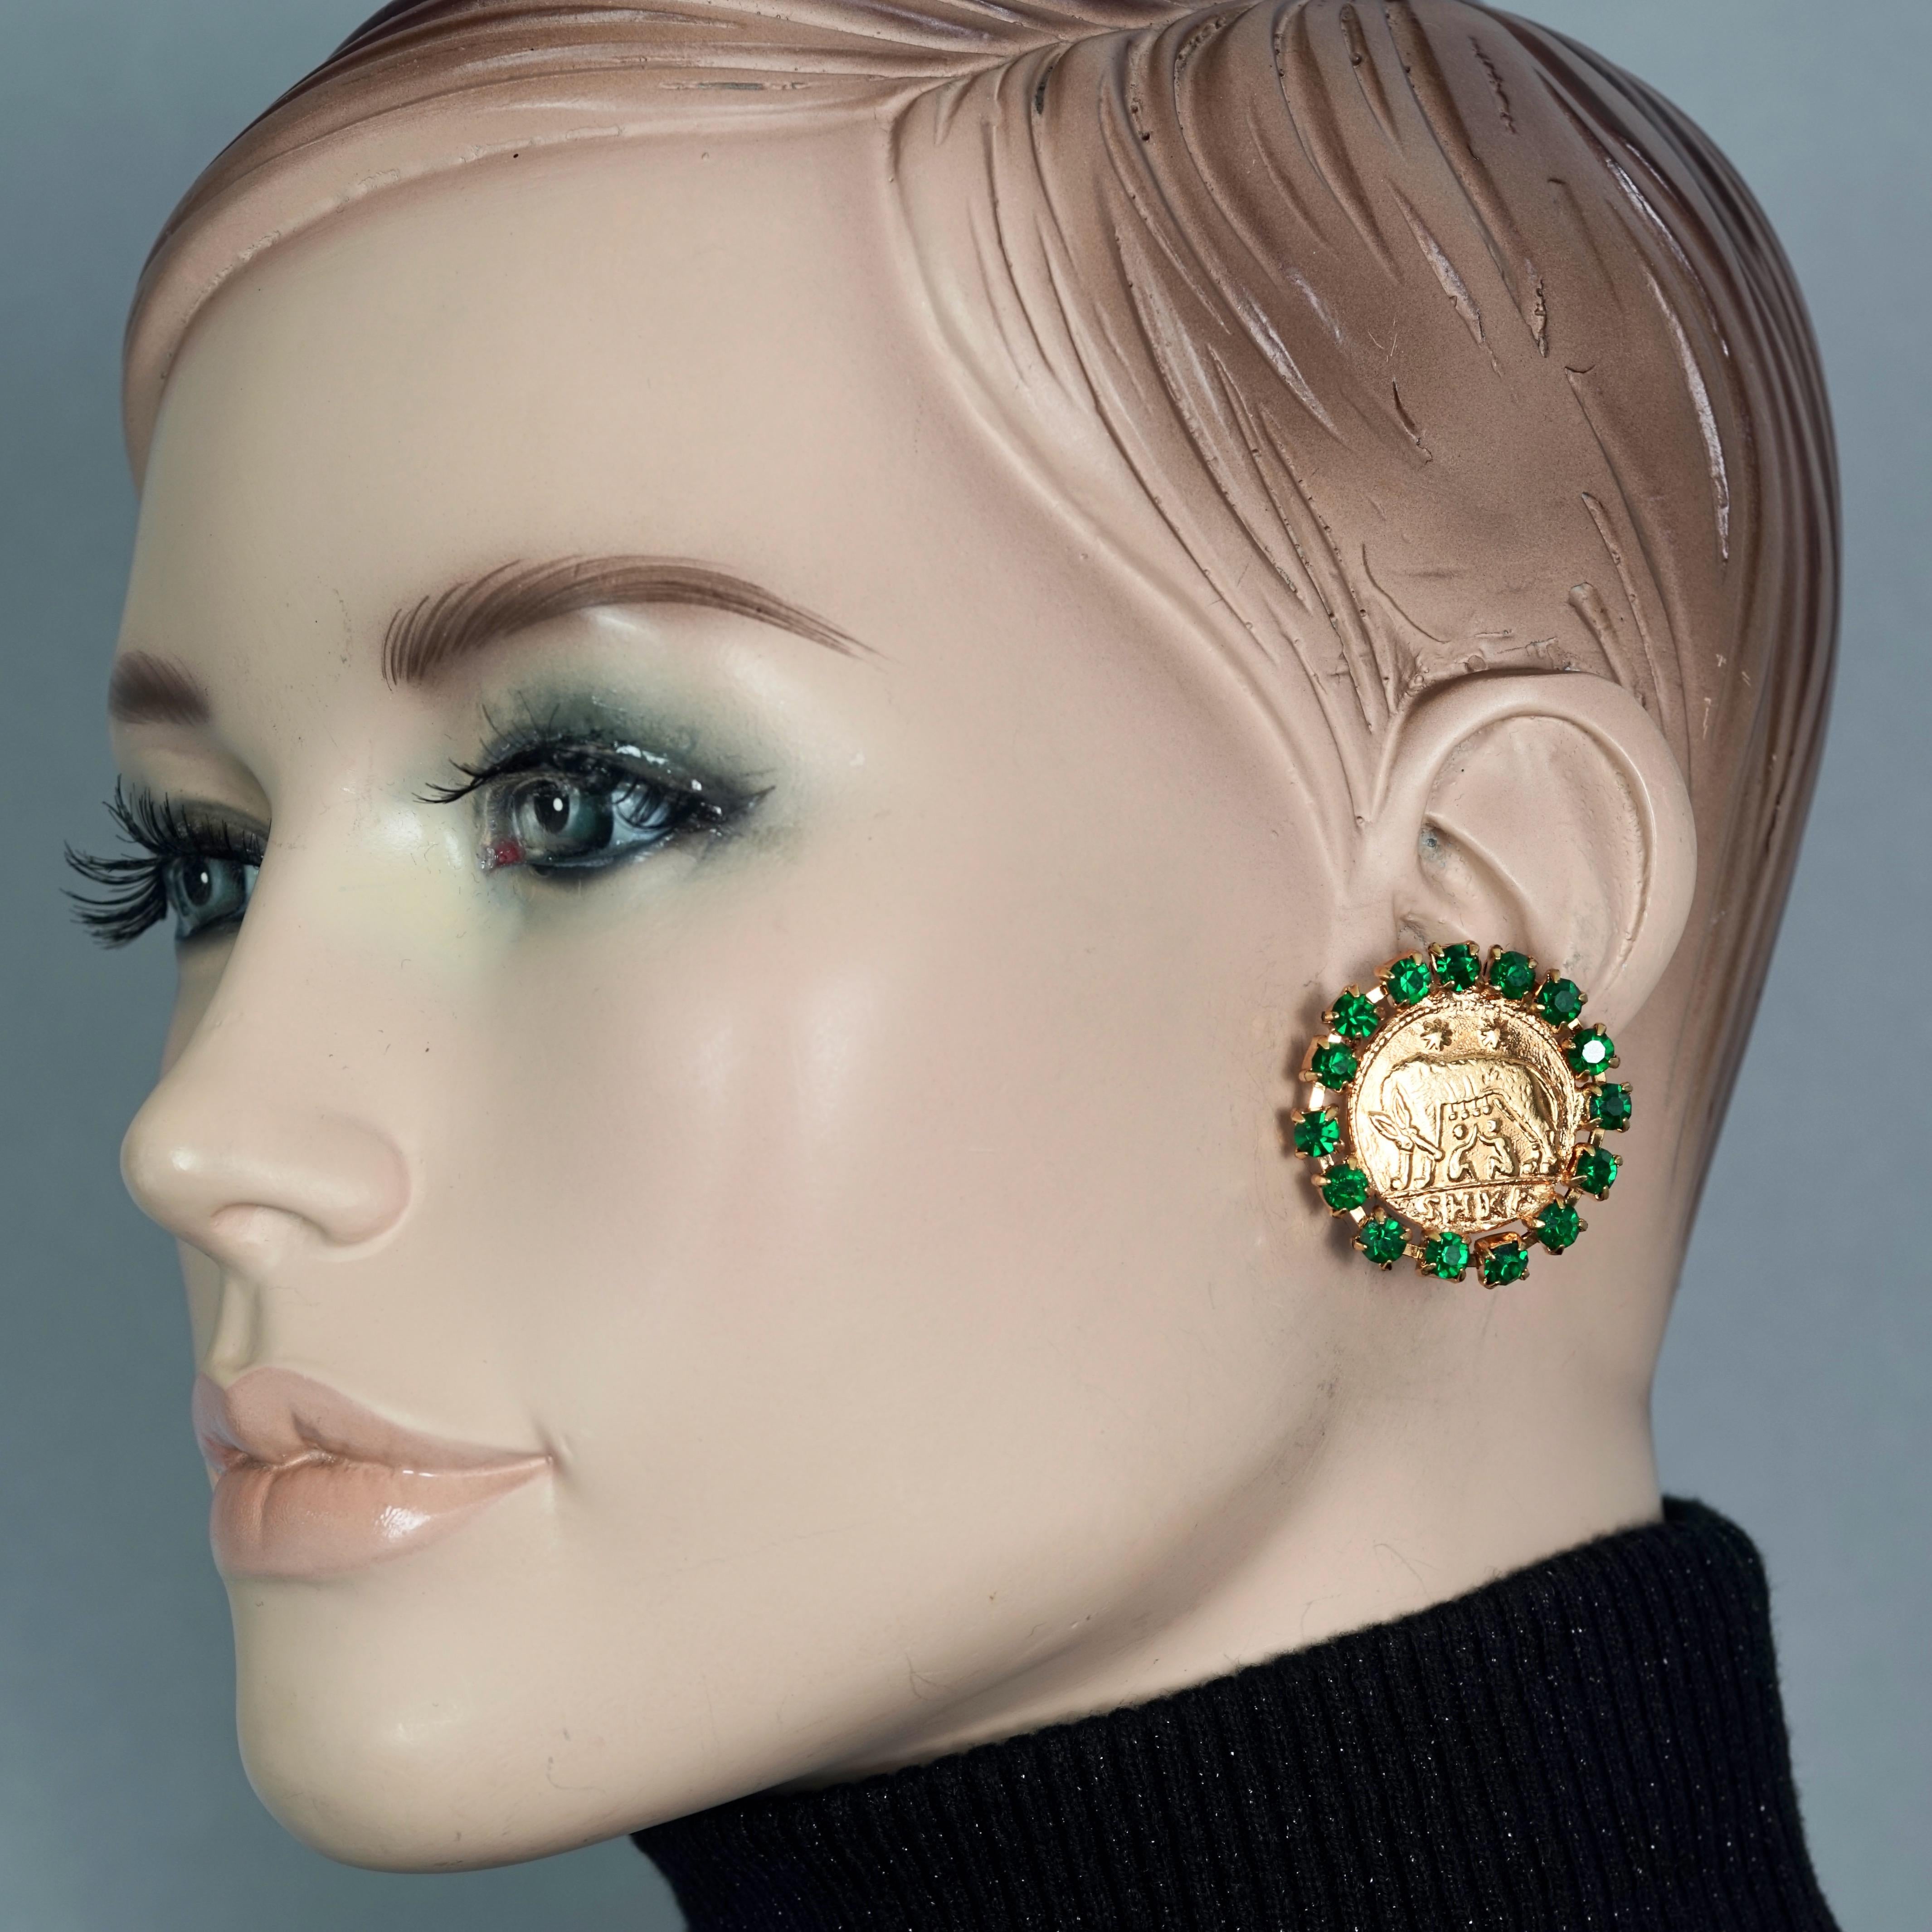 Vintage ROMULUS and REMUS Green Rhinestone Roman Coin Disc Earrings

Measurements:
Height: 1.34 inches (3.4 cm)
Width: 1.34 inches (3.4 cm)
Weight per Earring: 9 grams

Features:
- Roman Mythology disc earrings depicting ROMULUS and REMUS.
-